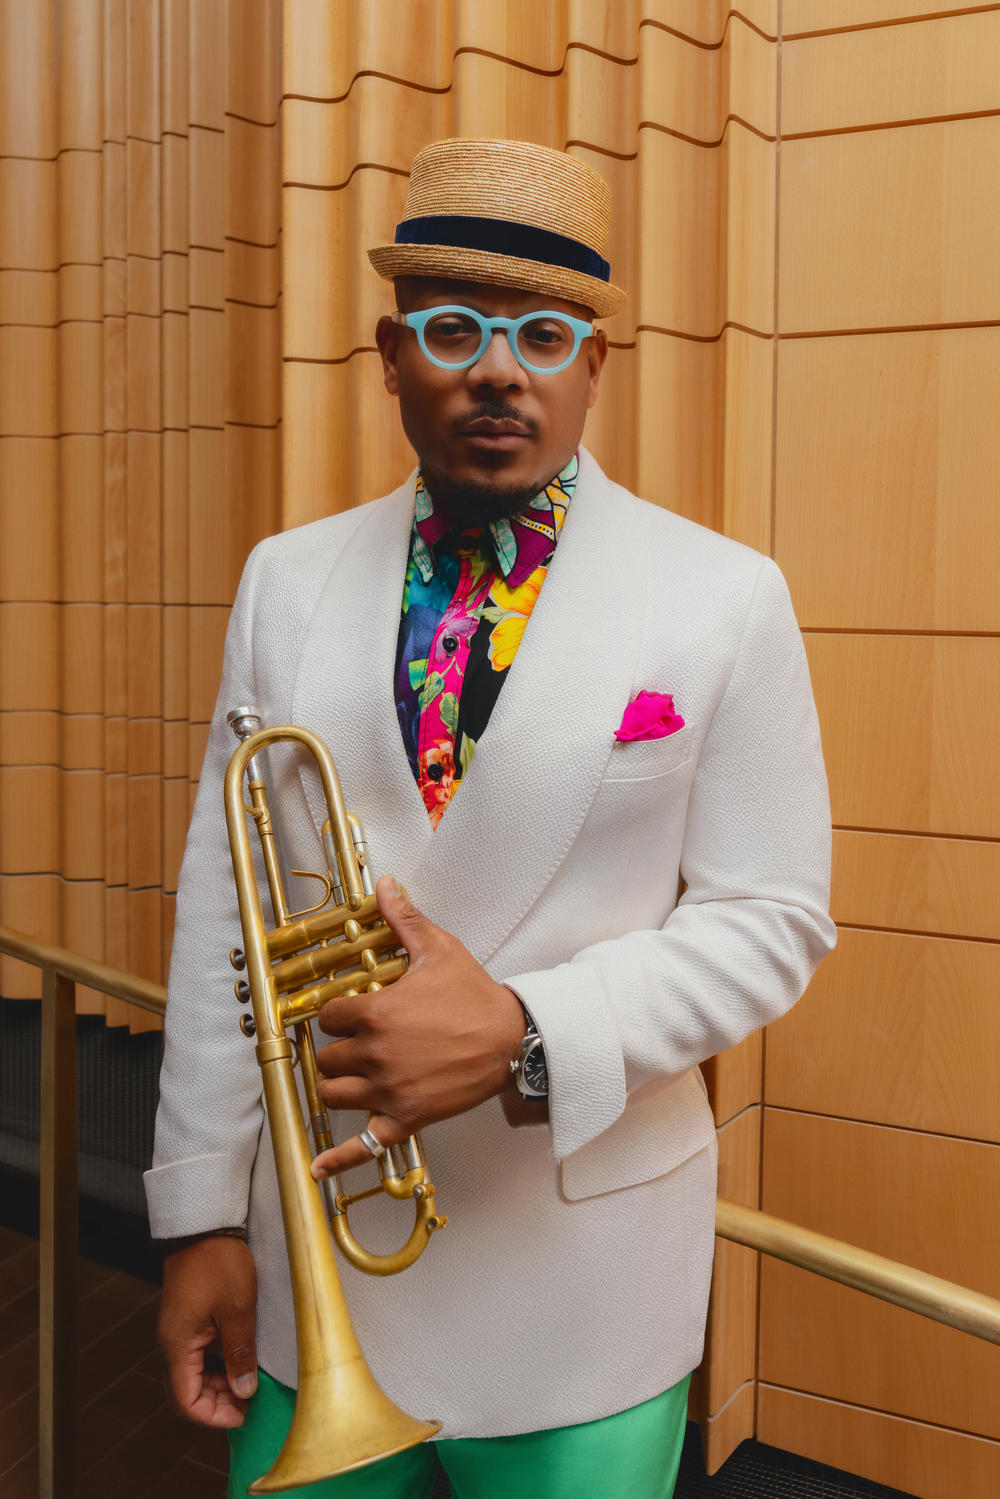 Composer and trumpeter Etienne Charles, whose <em>San Juan Hill: A New York Story</em> inaugurates the newly renovated David Geffen Hall.